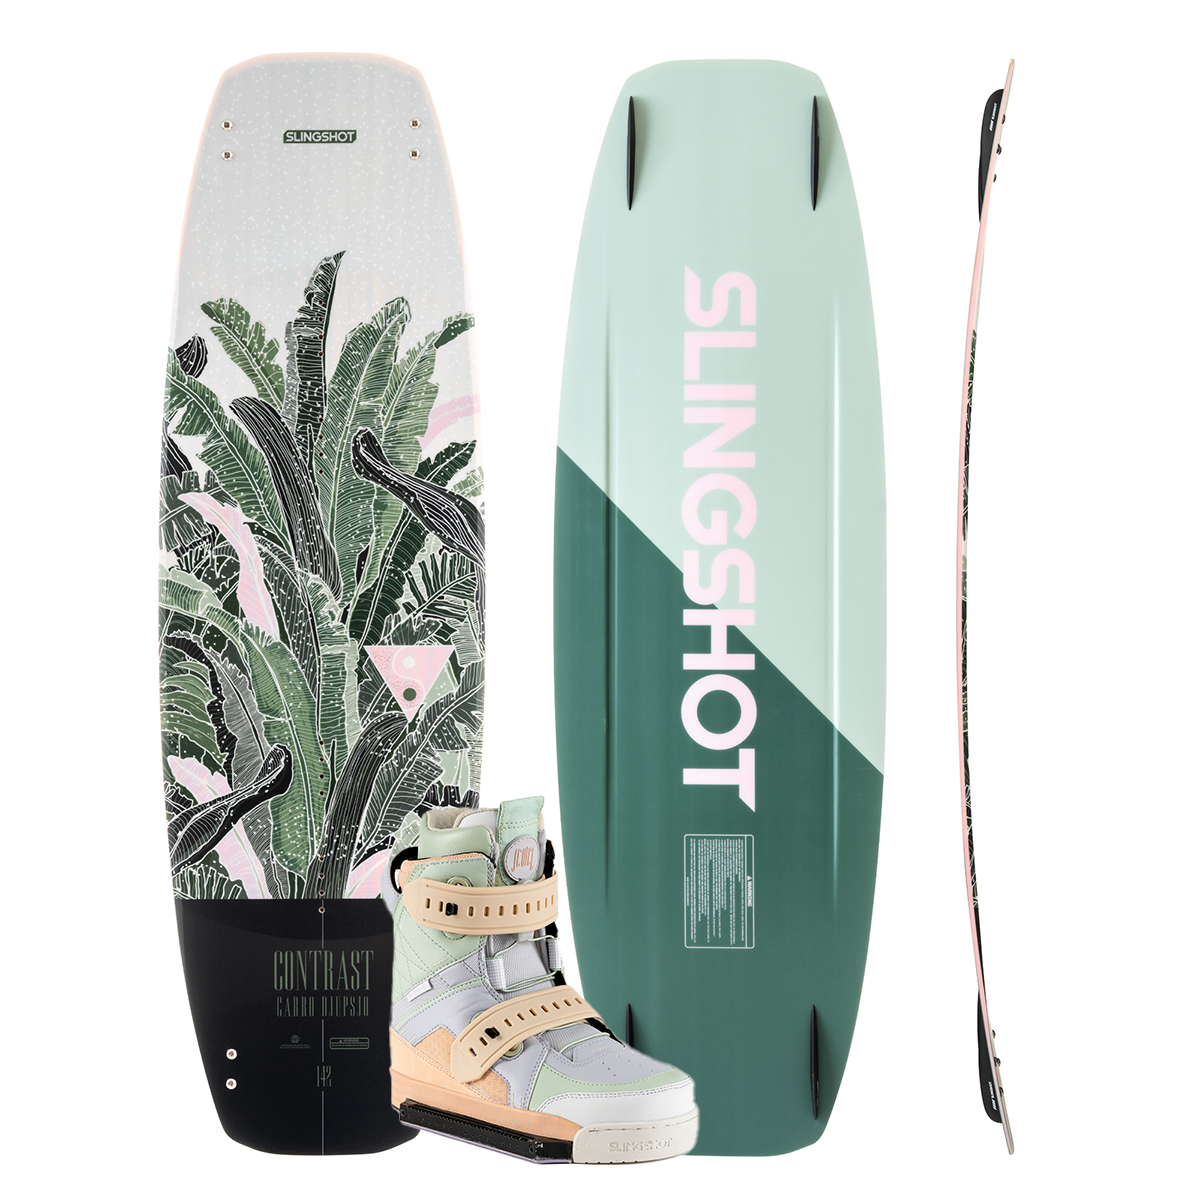 Paine Gillic Walter Cunningham Descripción Slingshot Contrast Wakeboard package with Jewel Boots - Wake Outfitters